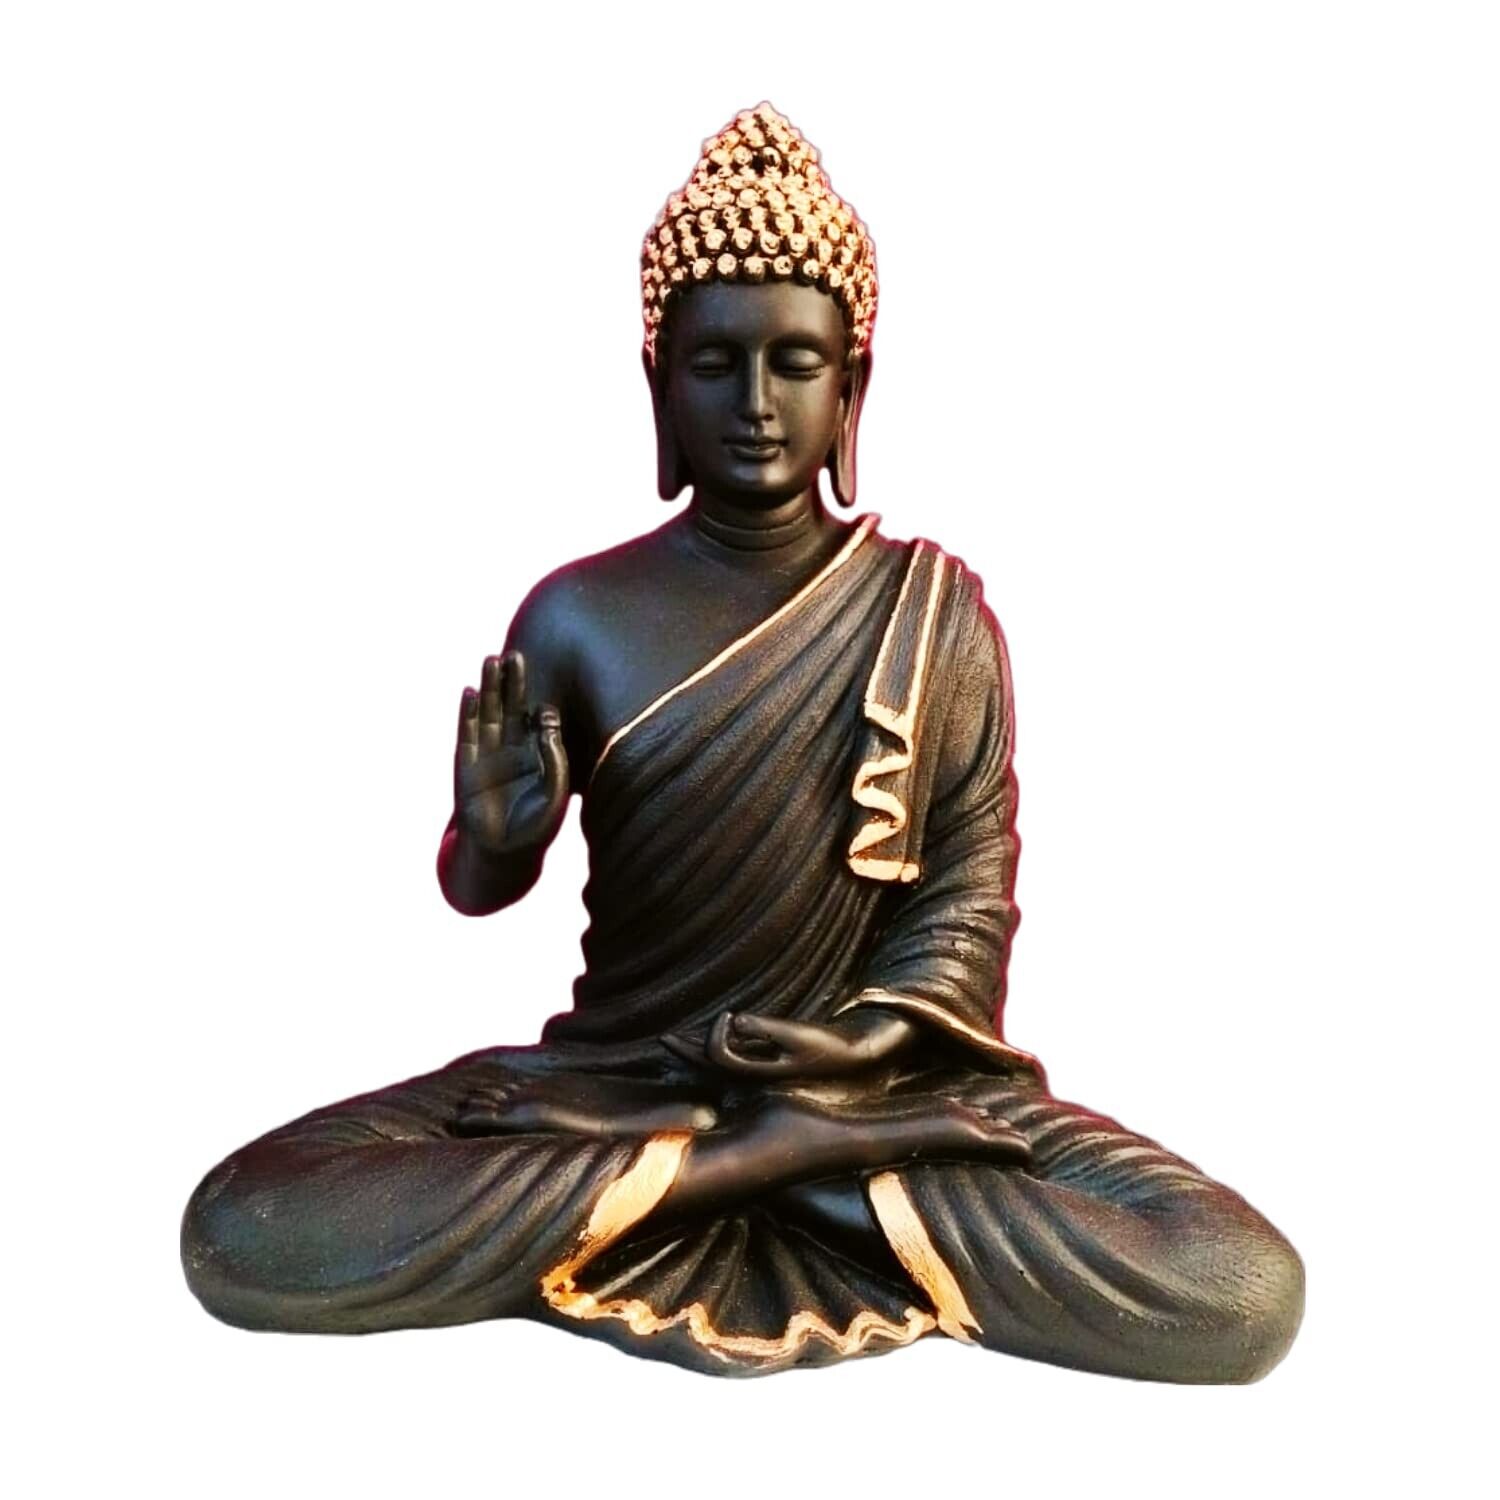 Big 14-Inch Meditating Black and Golden Buddha Statue - Home and Office Decor